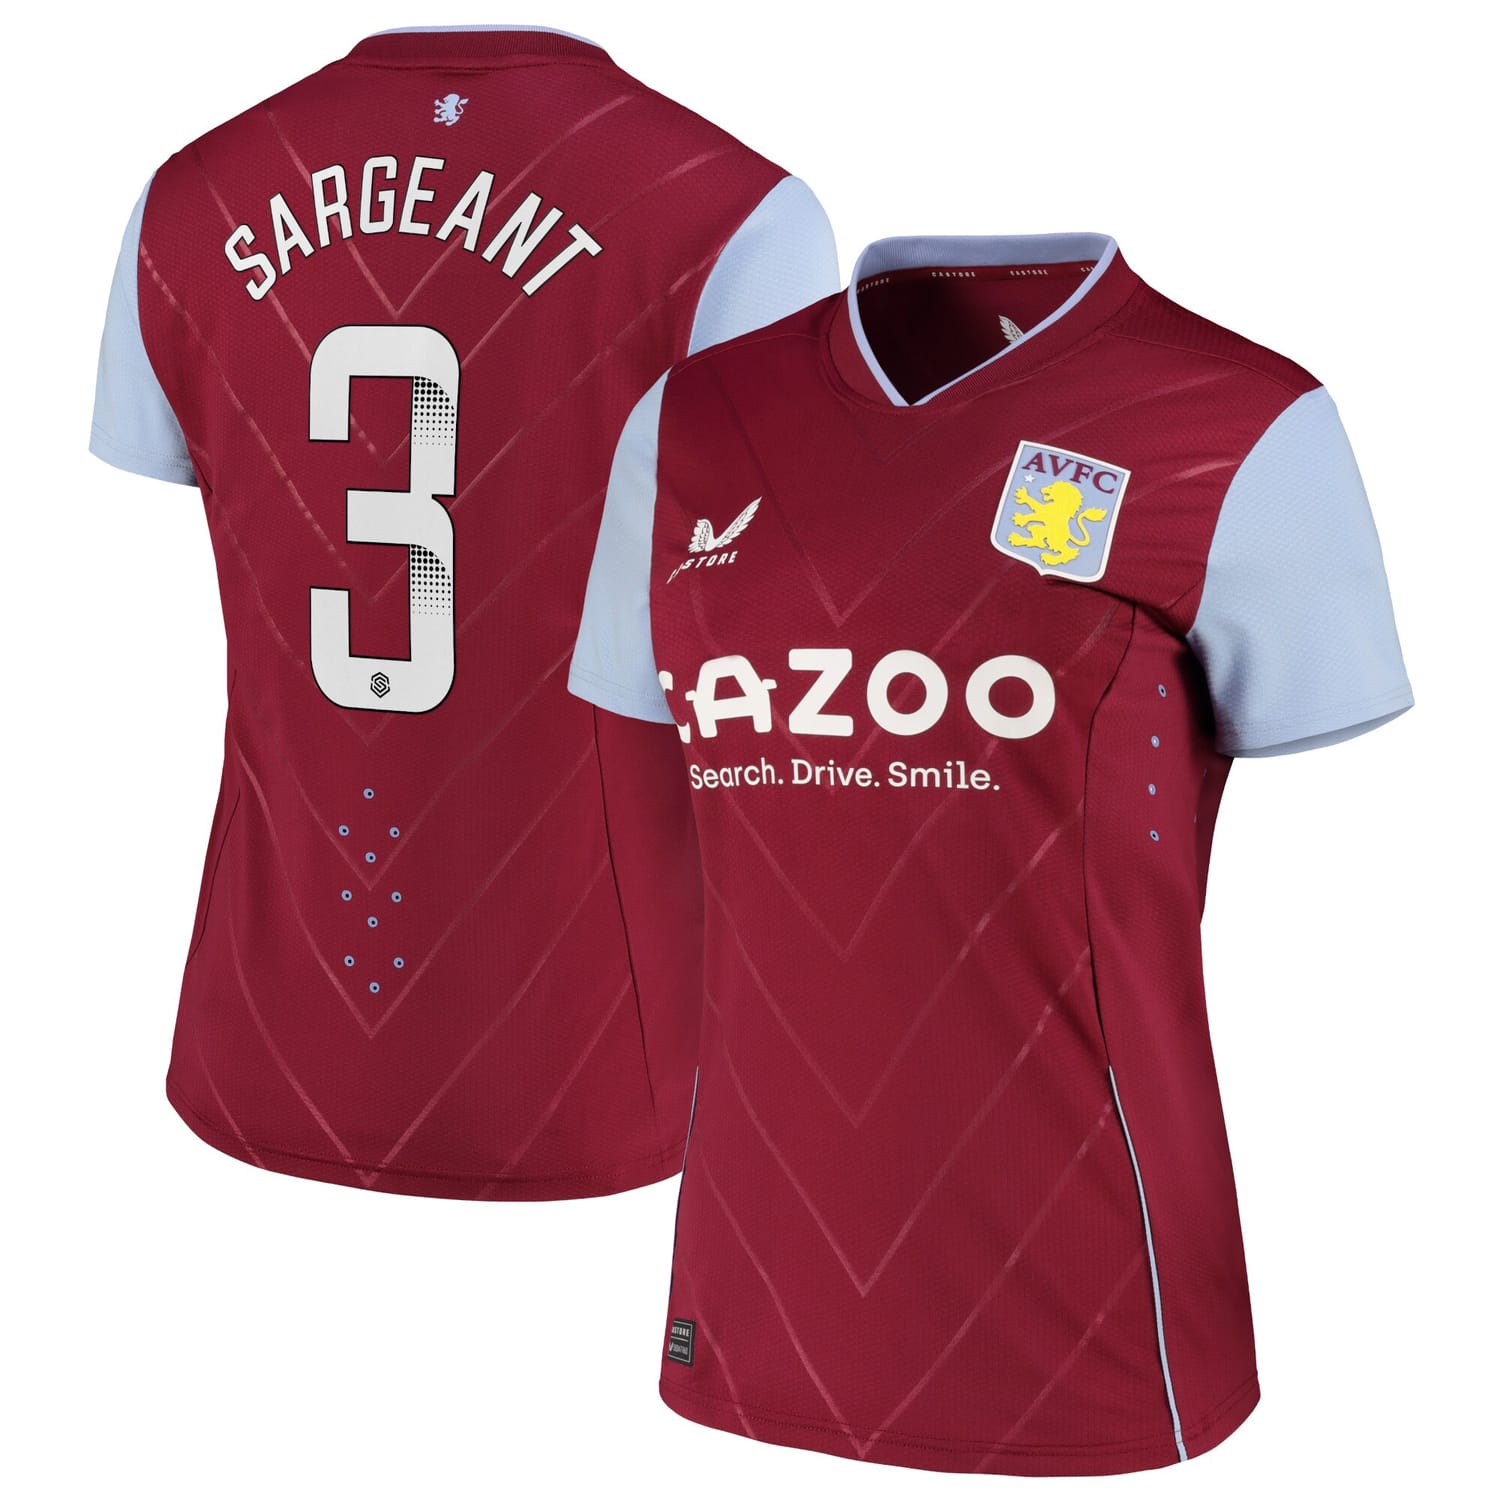 Premier League Aston Villa Home WSL Pro Jersey Shirt 2022-23 player Meaghan Sargeant 3 printing for Women